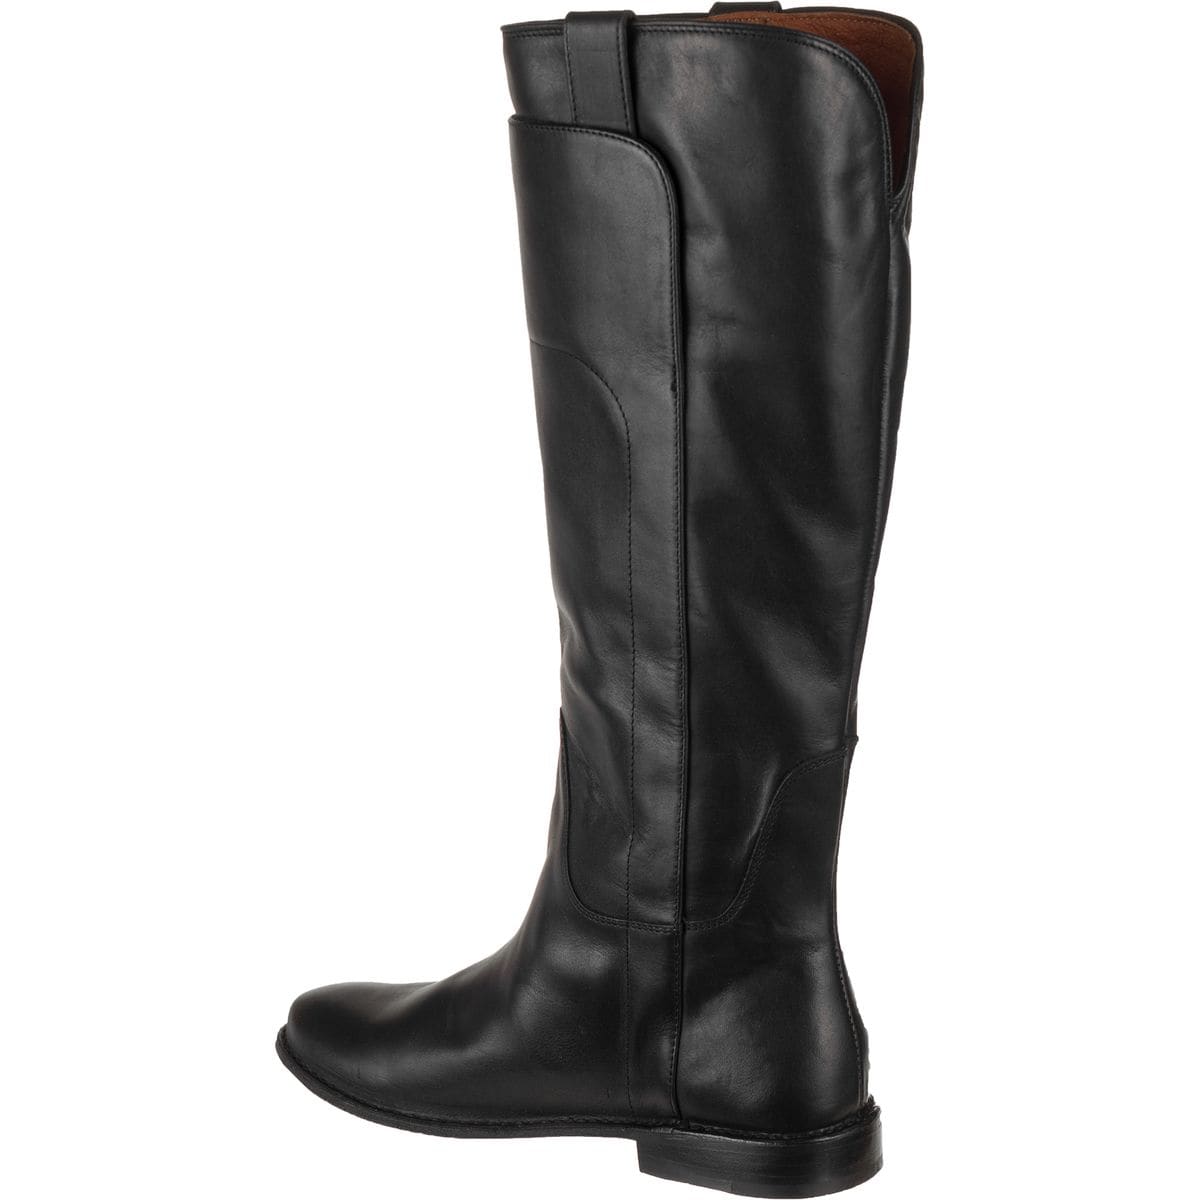 Frye Paige Tall Riding Boot - Women's | Backcountry.com